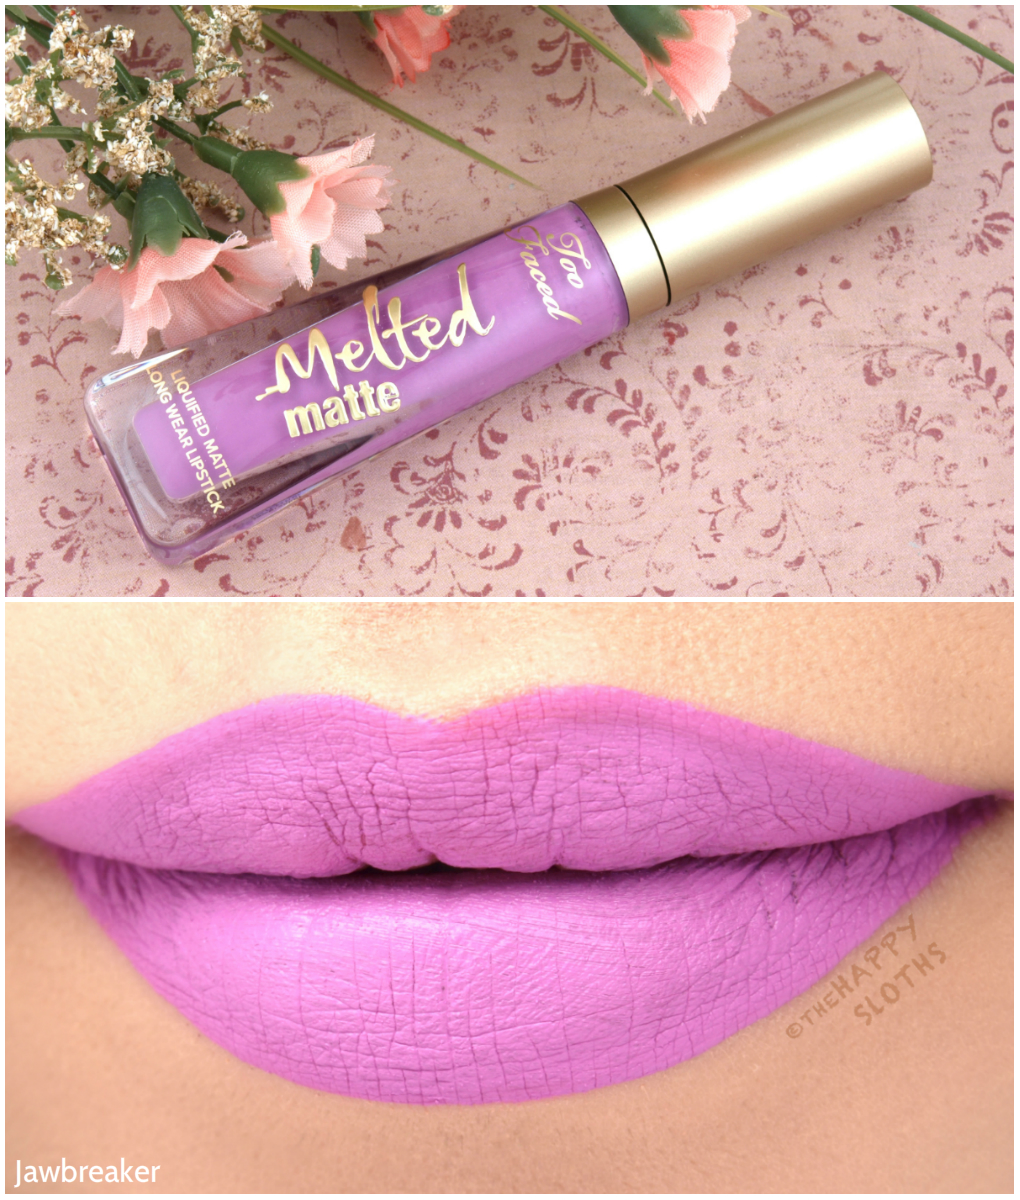 Too Faced Melted Matte Liquified Matte in "Jawbreaker": Review and Swatches